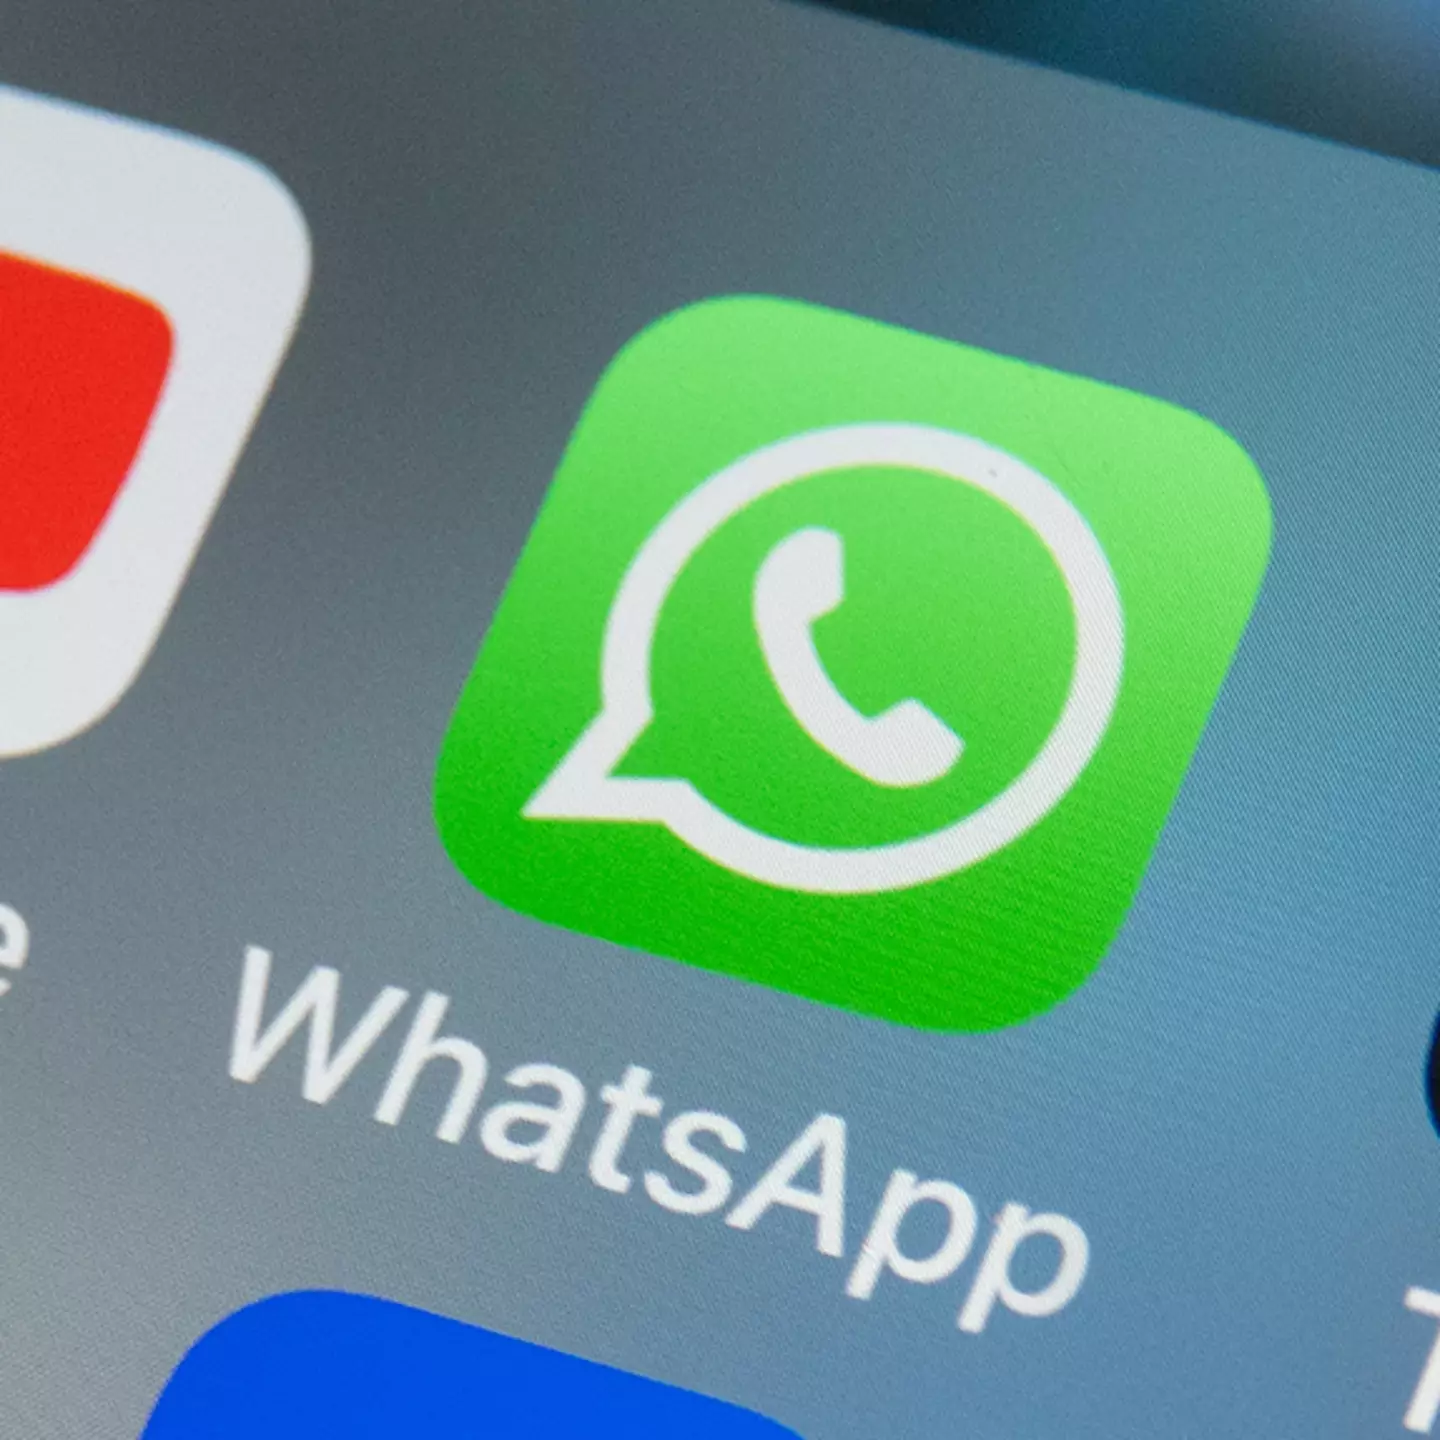 Experts issue warning over WhatsApp audio scam targeting family and friends